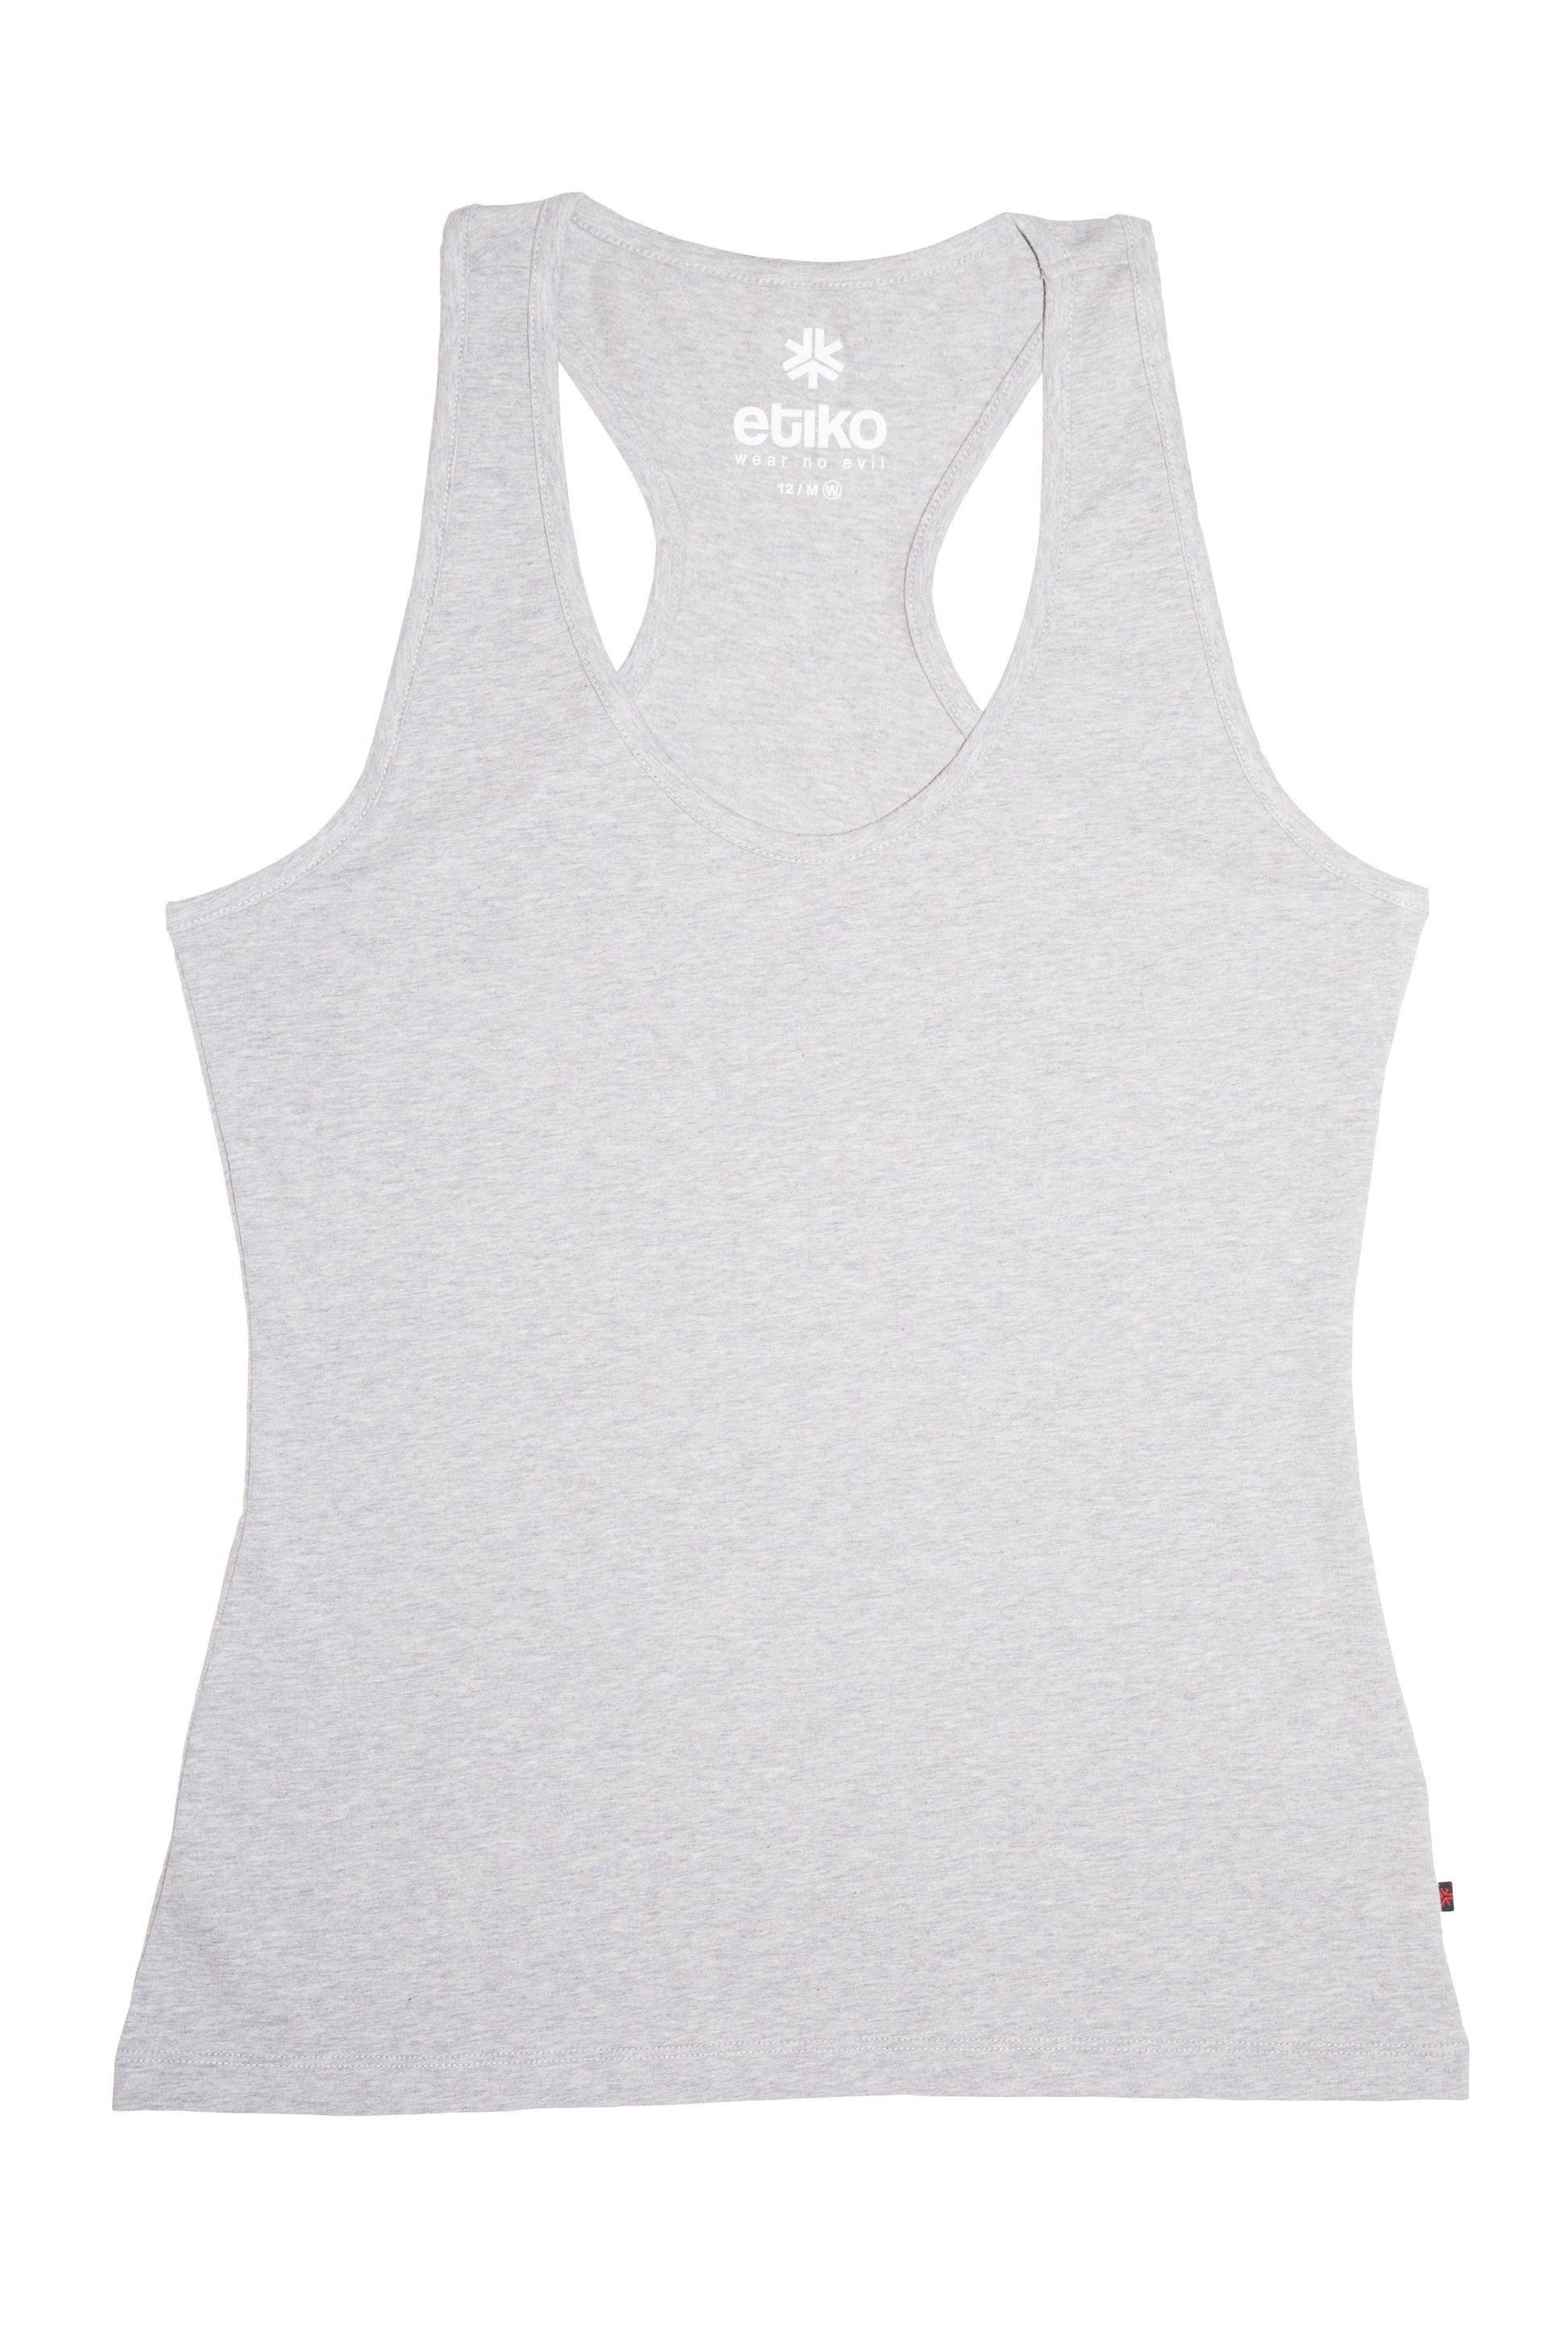 Grey tank top with racerback ethically made of fairtrade certified organic cotton